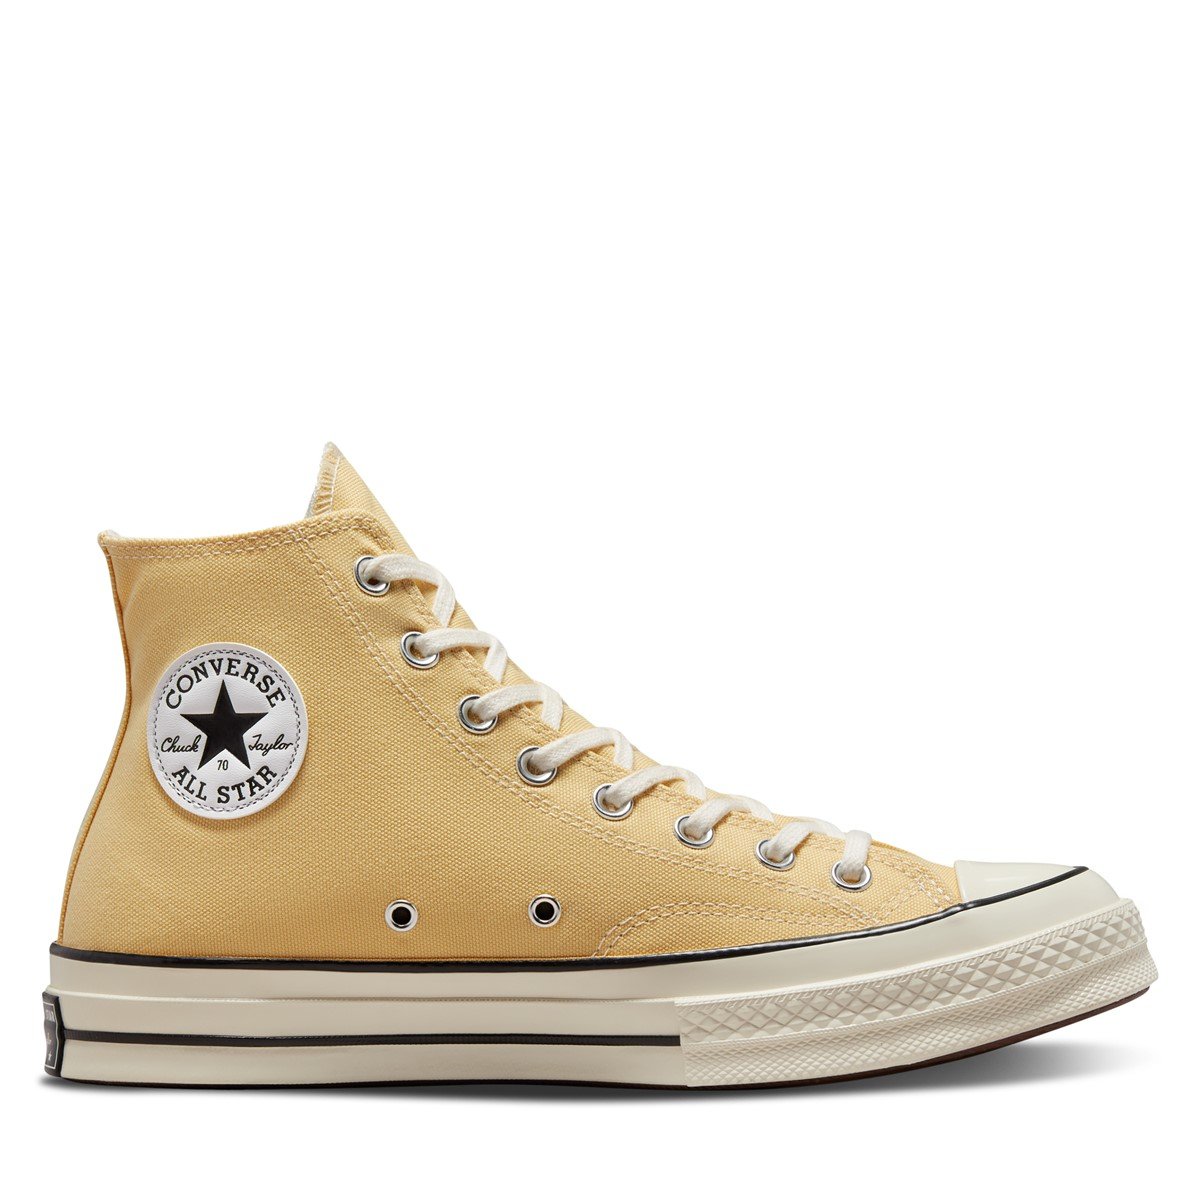 Chuck 70 Hi Sneakers in Bright Yellow | Little Burgundy